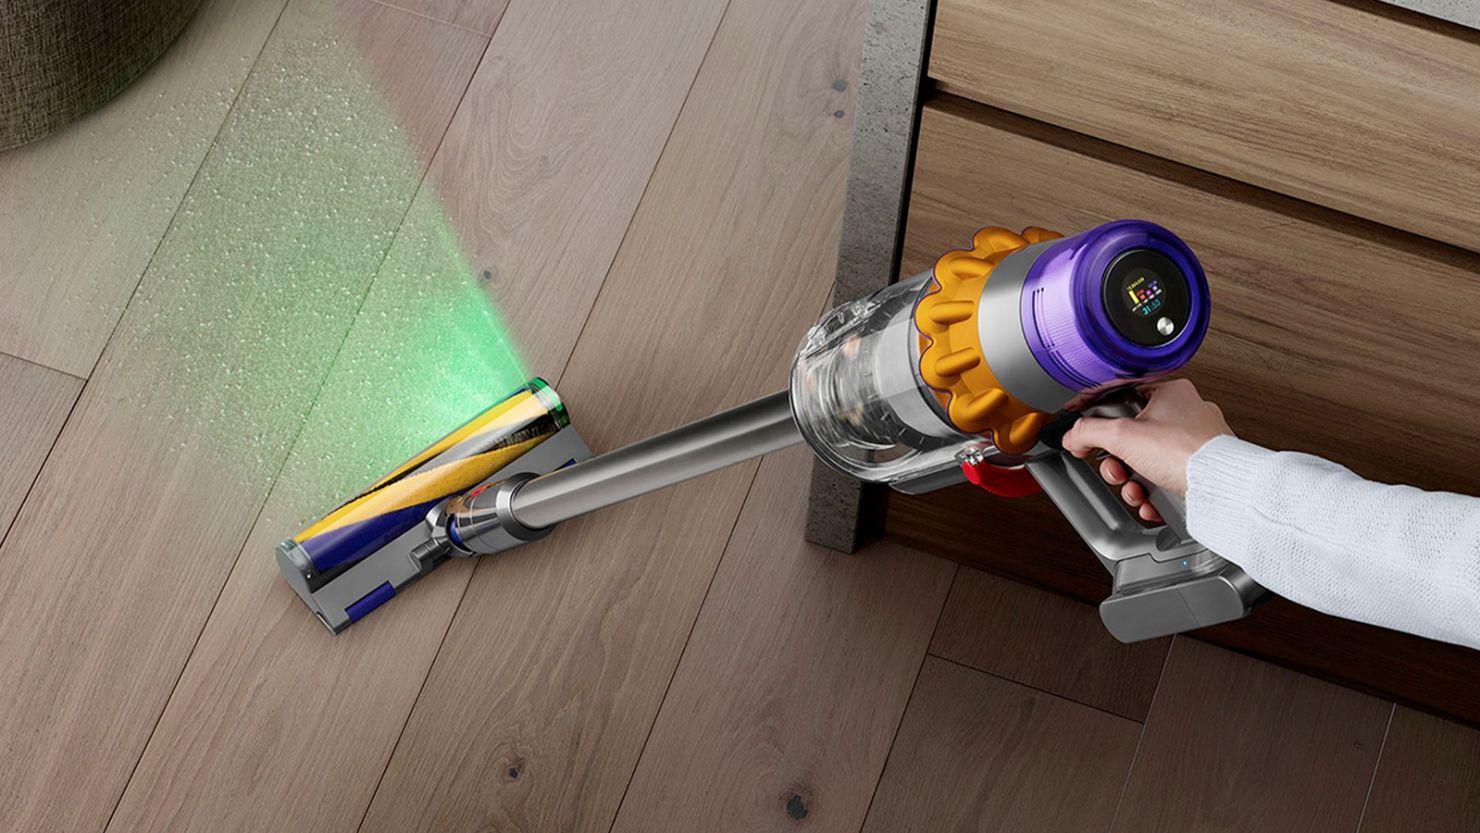 Dyson V15 Detect Vacuum Cleaner Review - Consumer Reports